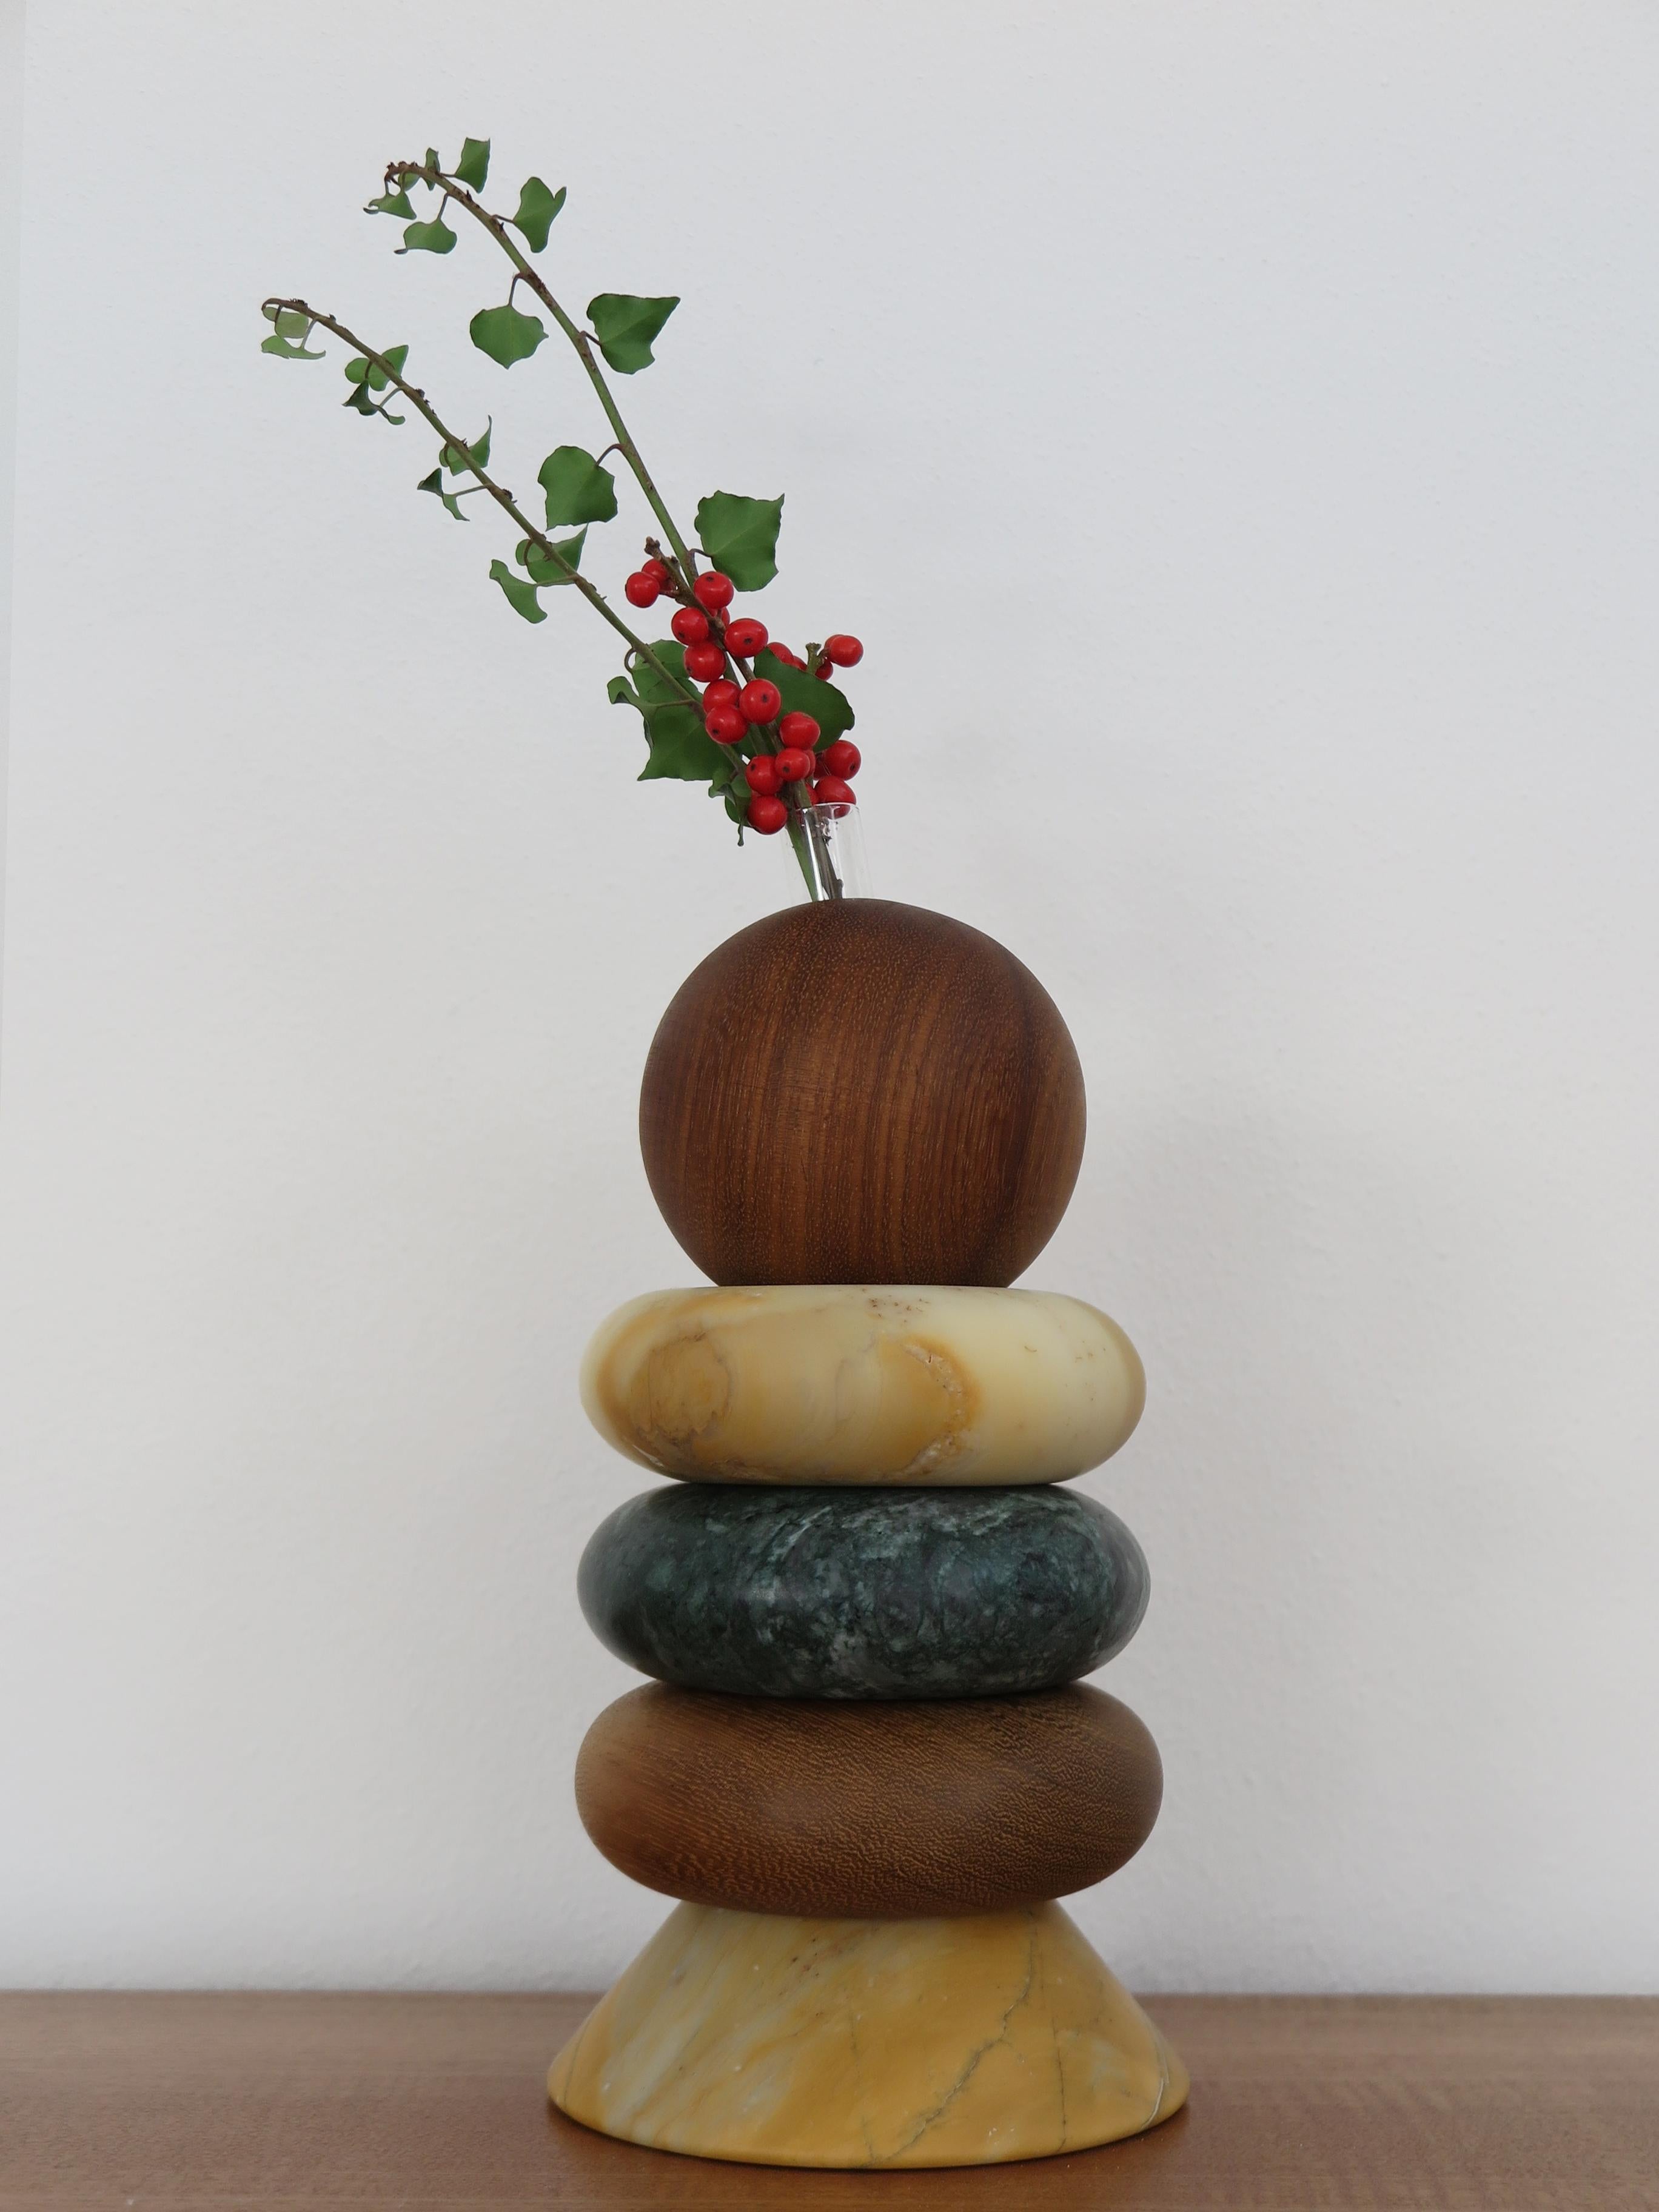 Italian contemporary sculpture, candle holder and flower vase, modular as you like made up of green Alpi marble, yellow Siena marble, and solid wood with including two glass vases for fresh flowers.
The various elements can be composed and stacked